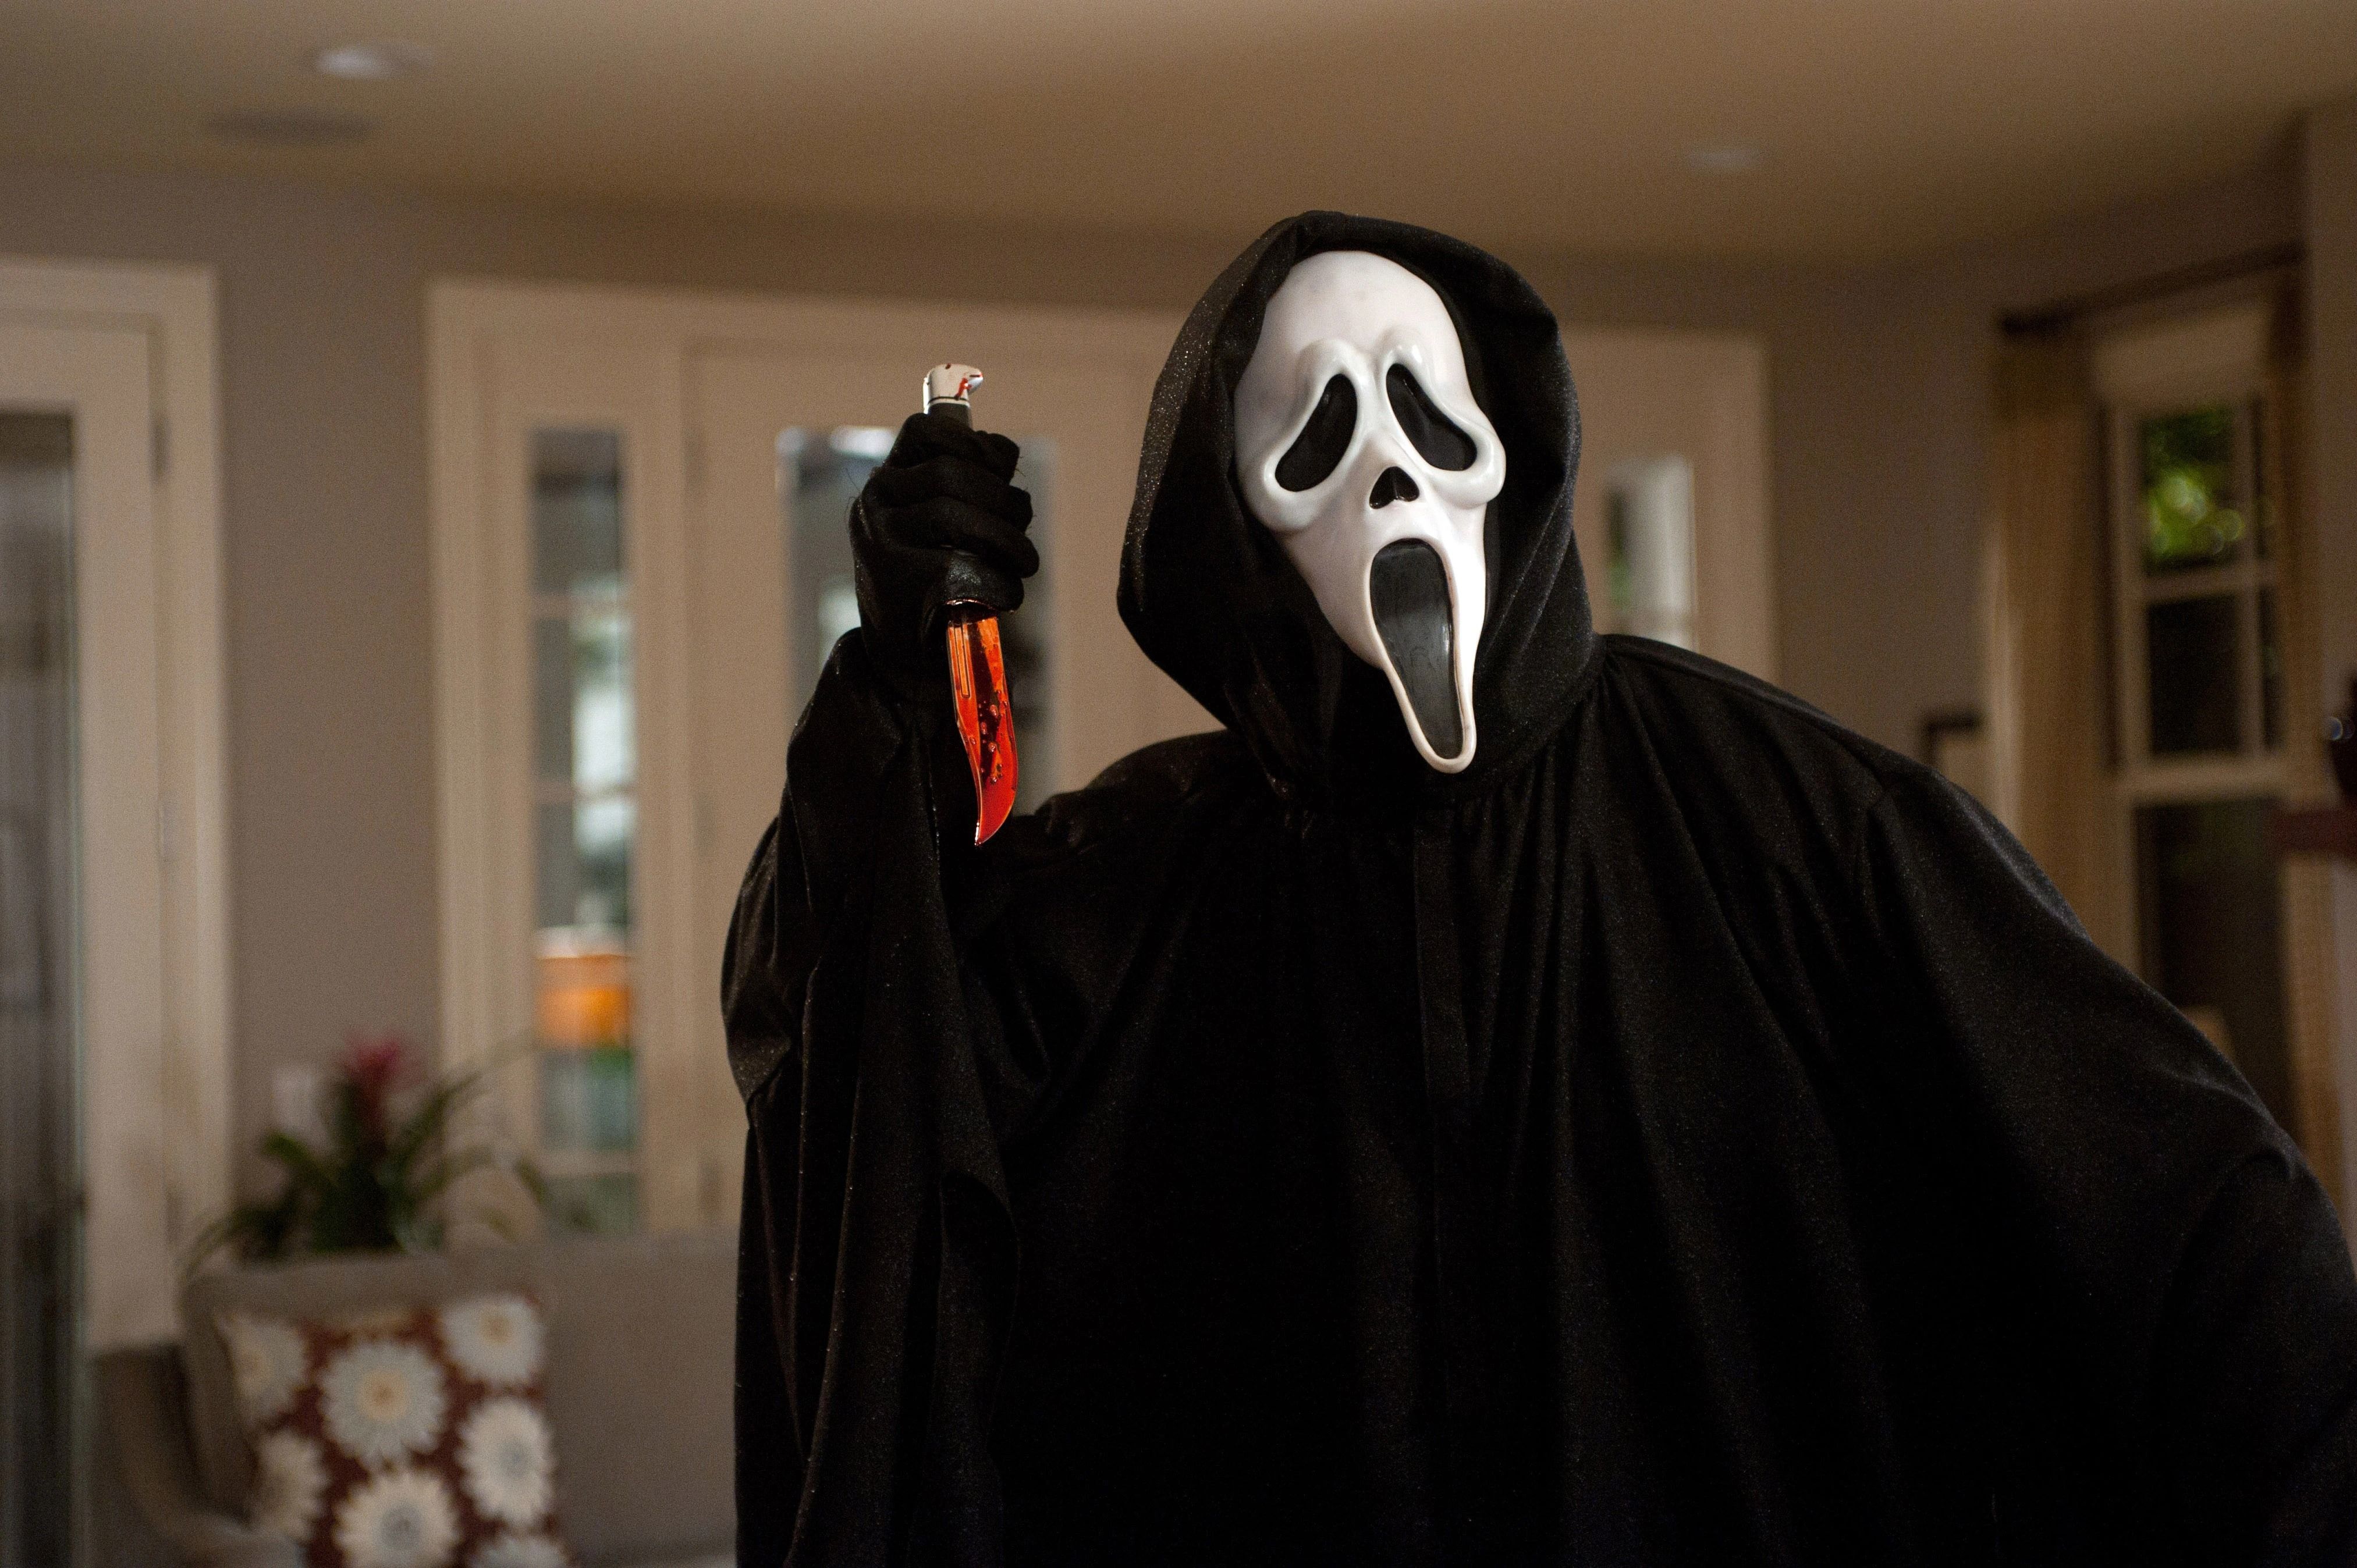 Scream 6 Has Proven to me that the Scream Franchise is the Most